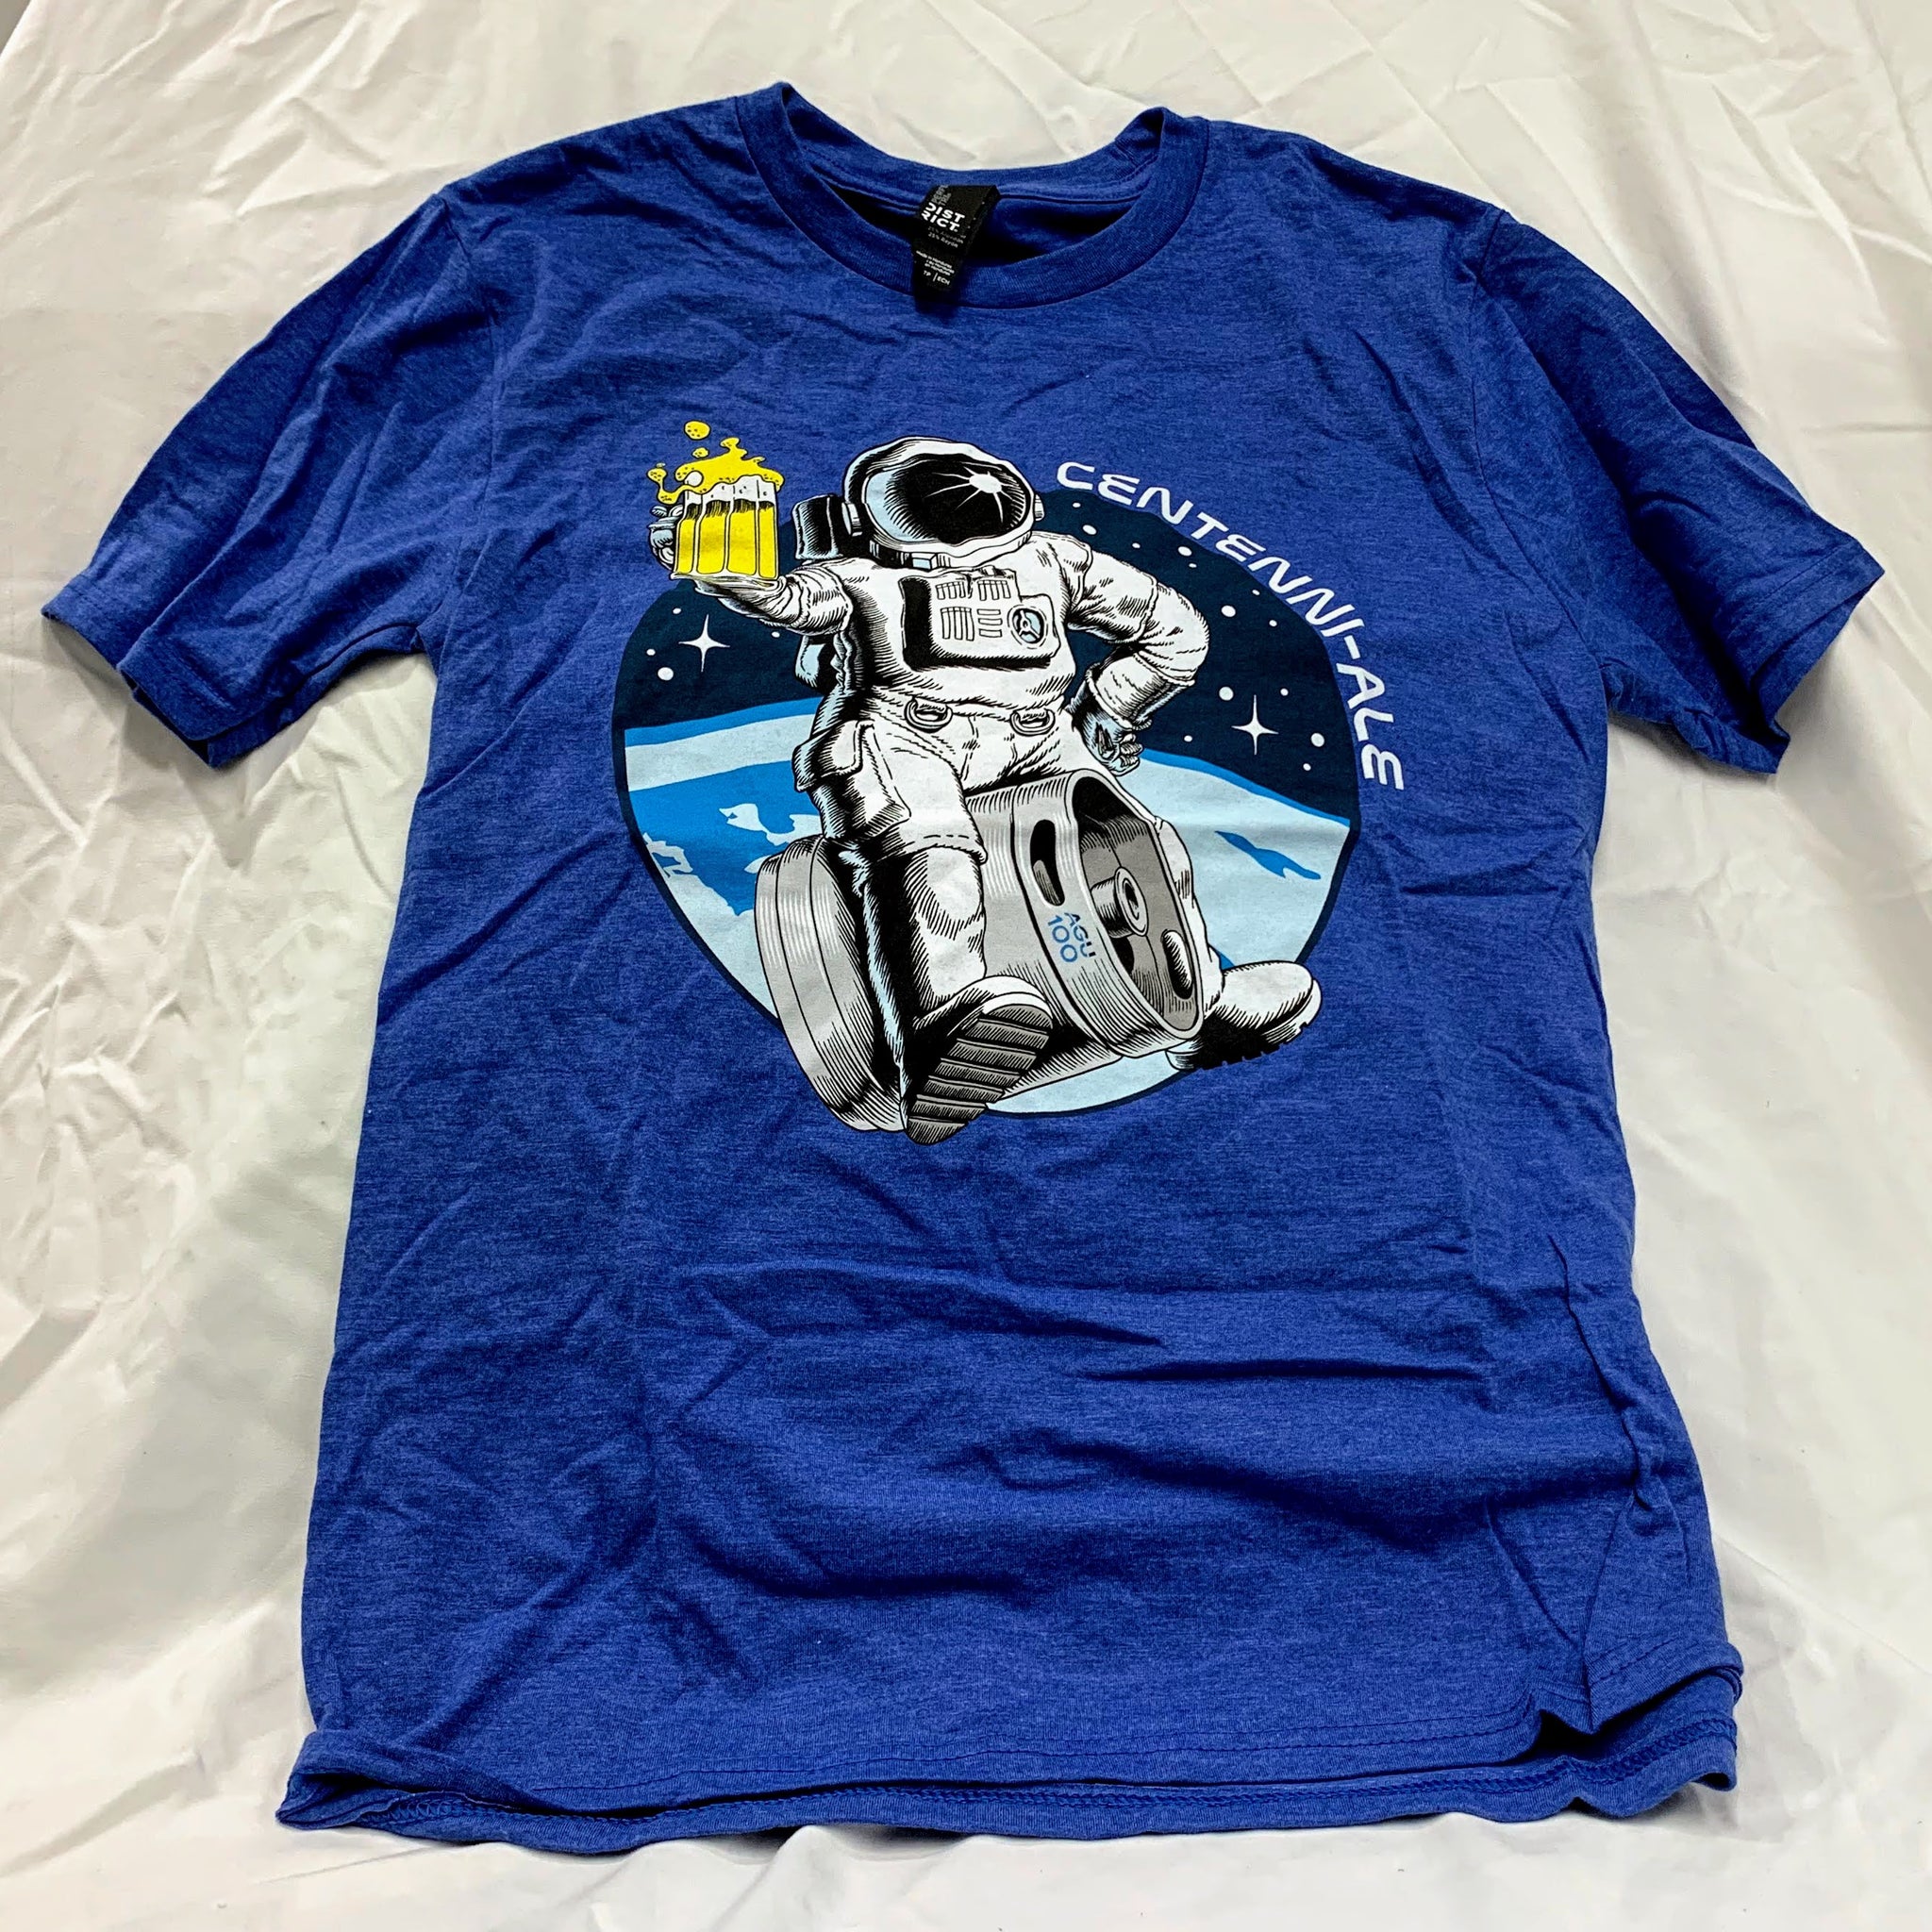 Blue AGU100 "Centenni-Ale" t-shirt with illustration of astronaut and keg